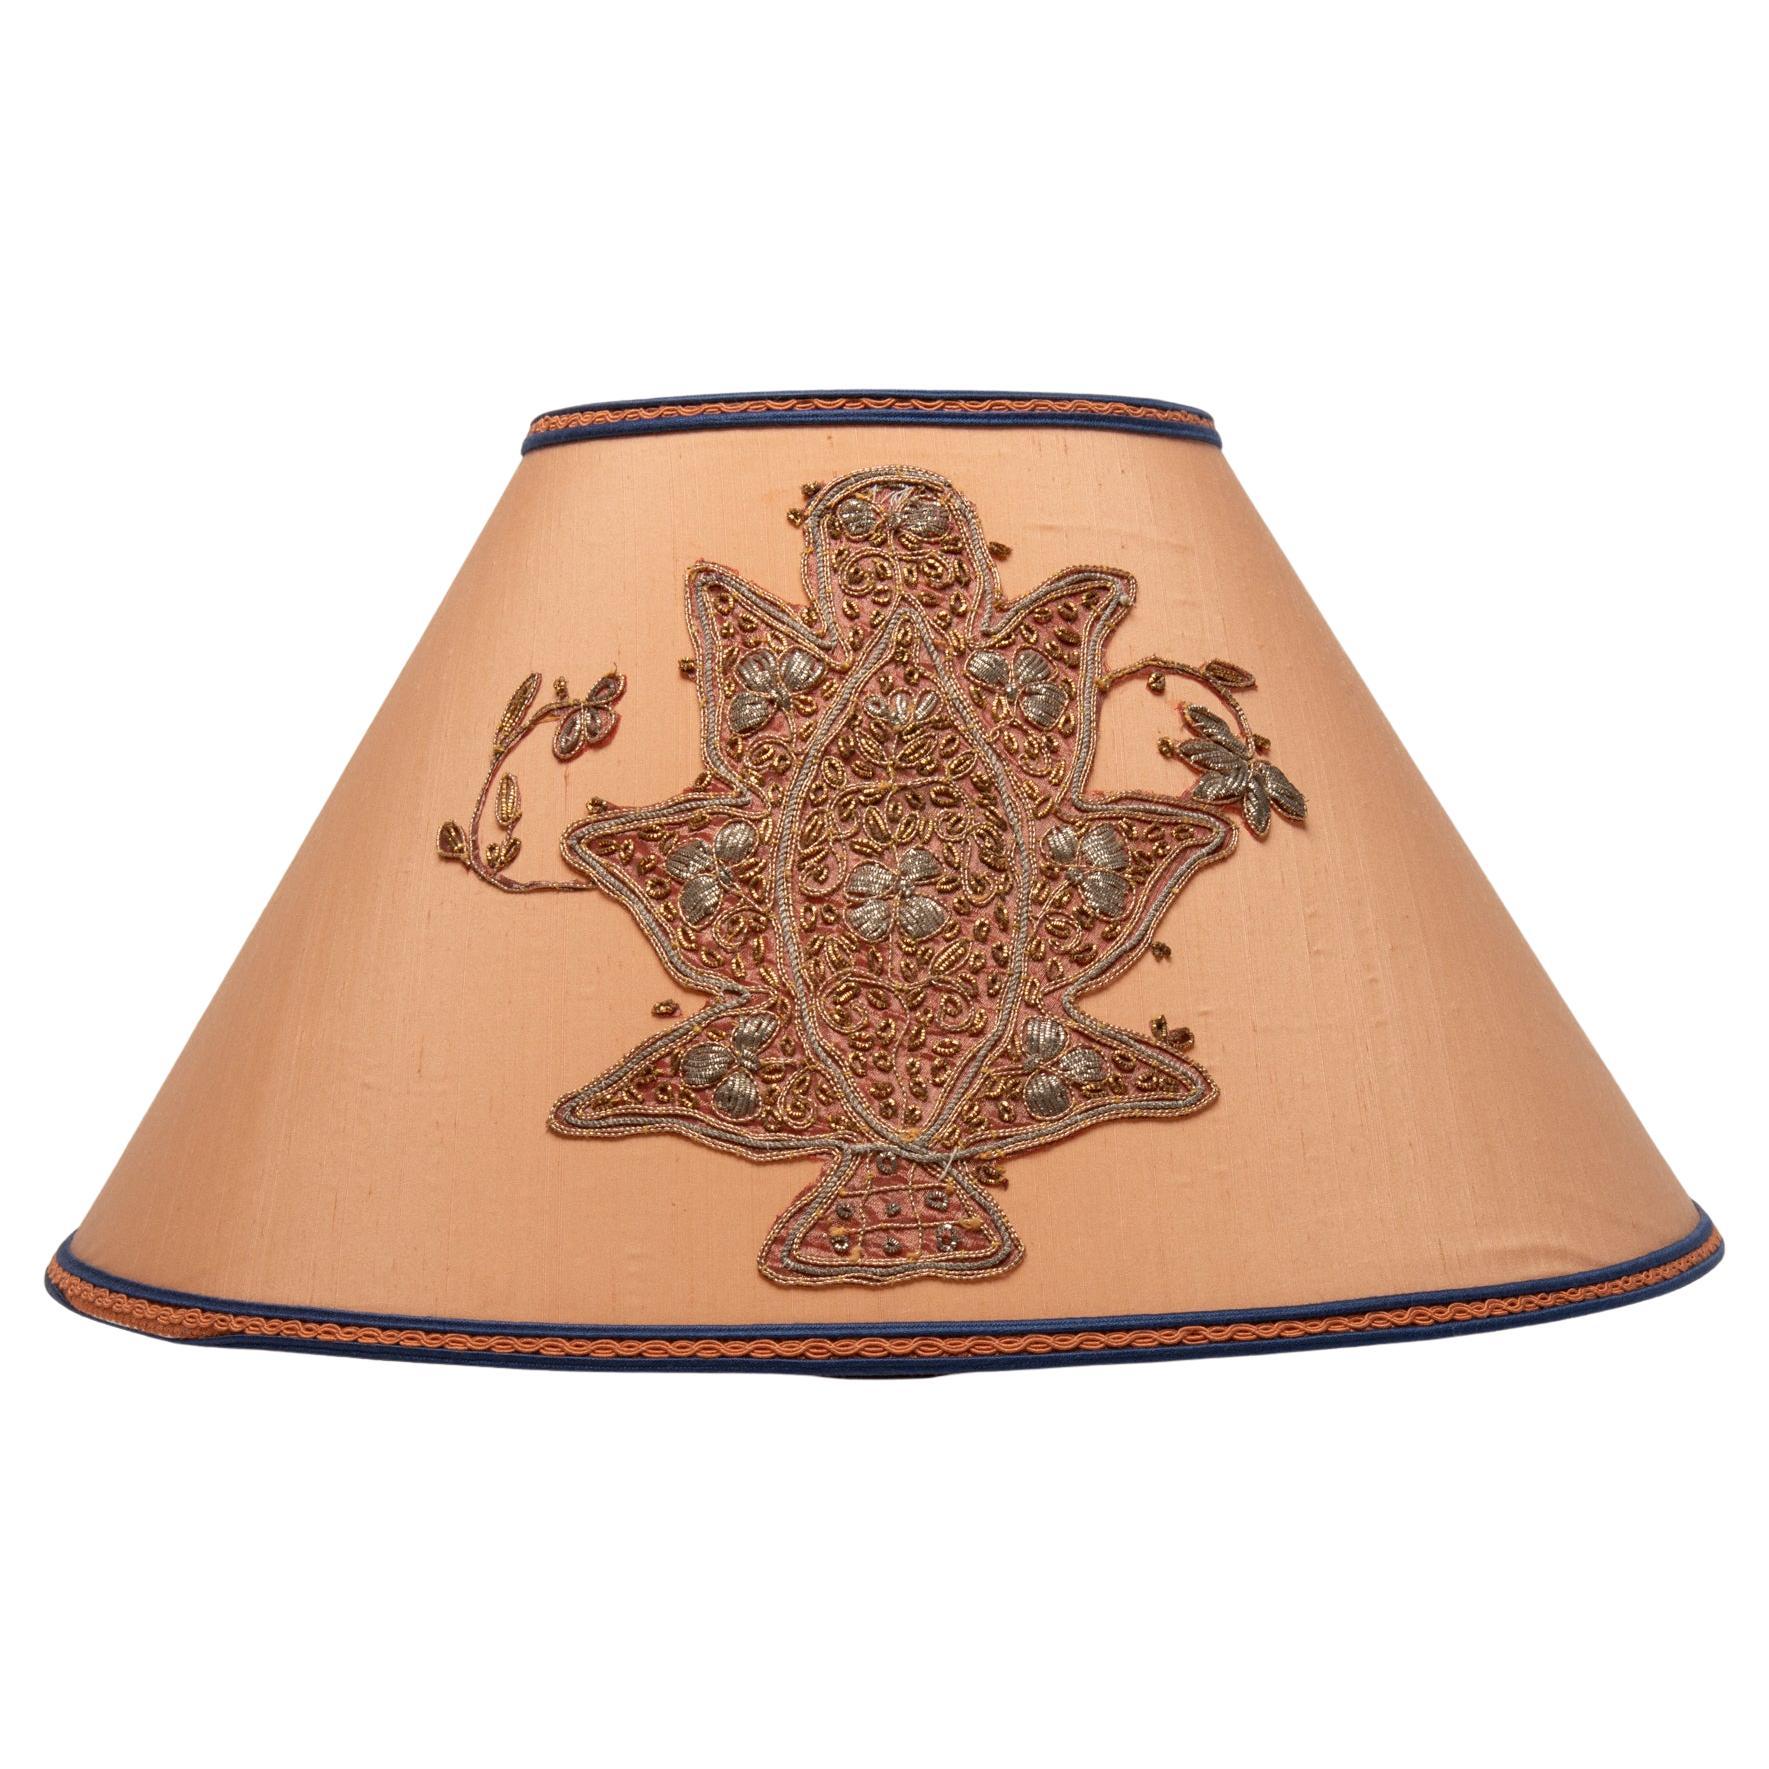 O/423 -  Unique piece : lamp hat embroidered in silver tinsel -  It is suitable for a high floor or table lamp.
The price is very interesting because I want to close my activities. 
Look also the other one published, even more important but with the